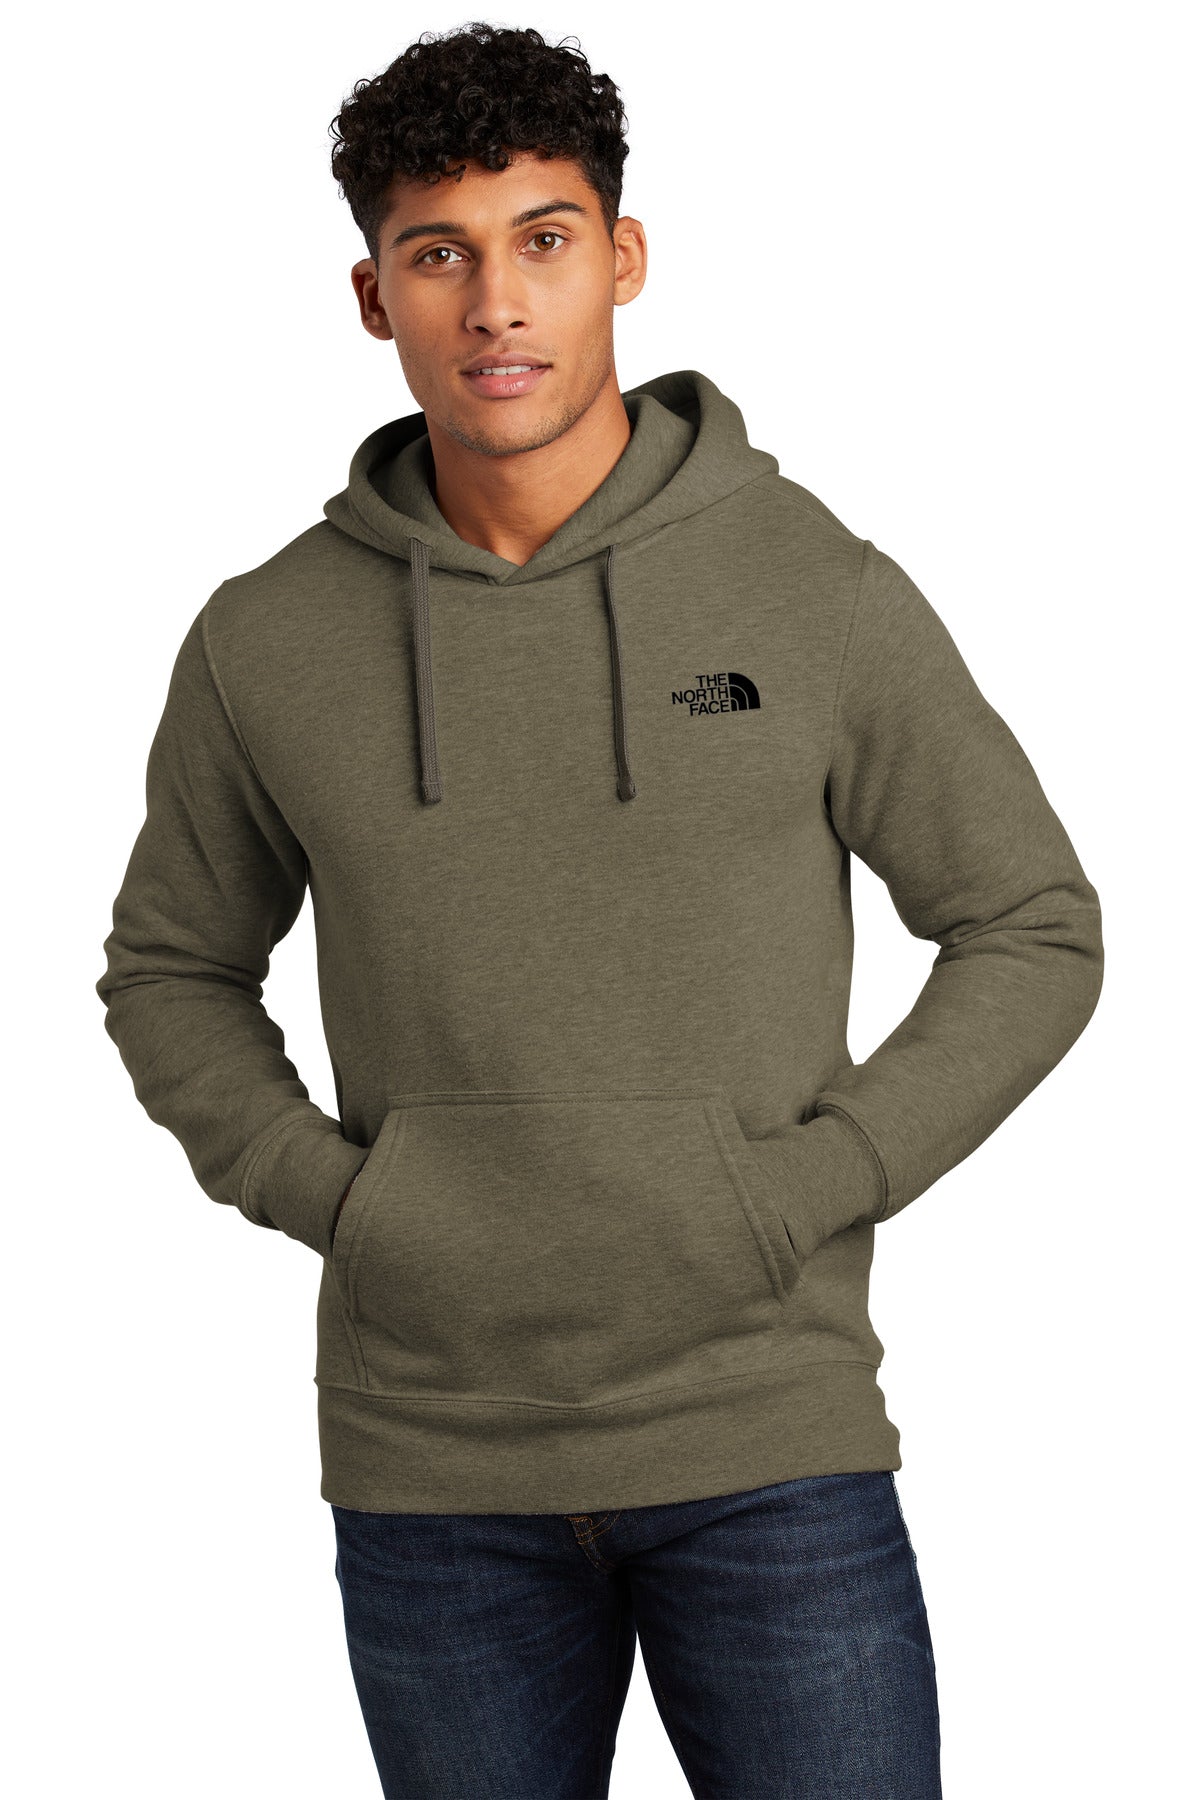 LIMITED EDITION The North FaceÂ® Chest Logo Pullover Hoodie